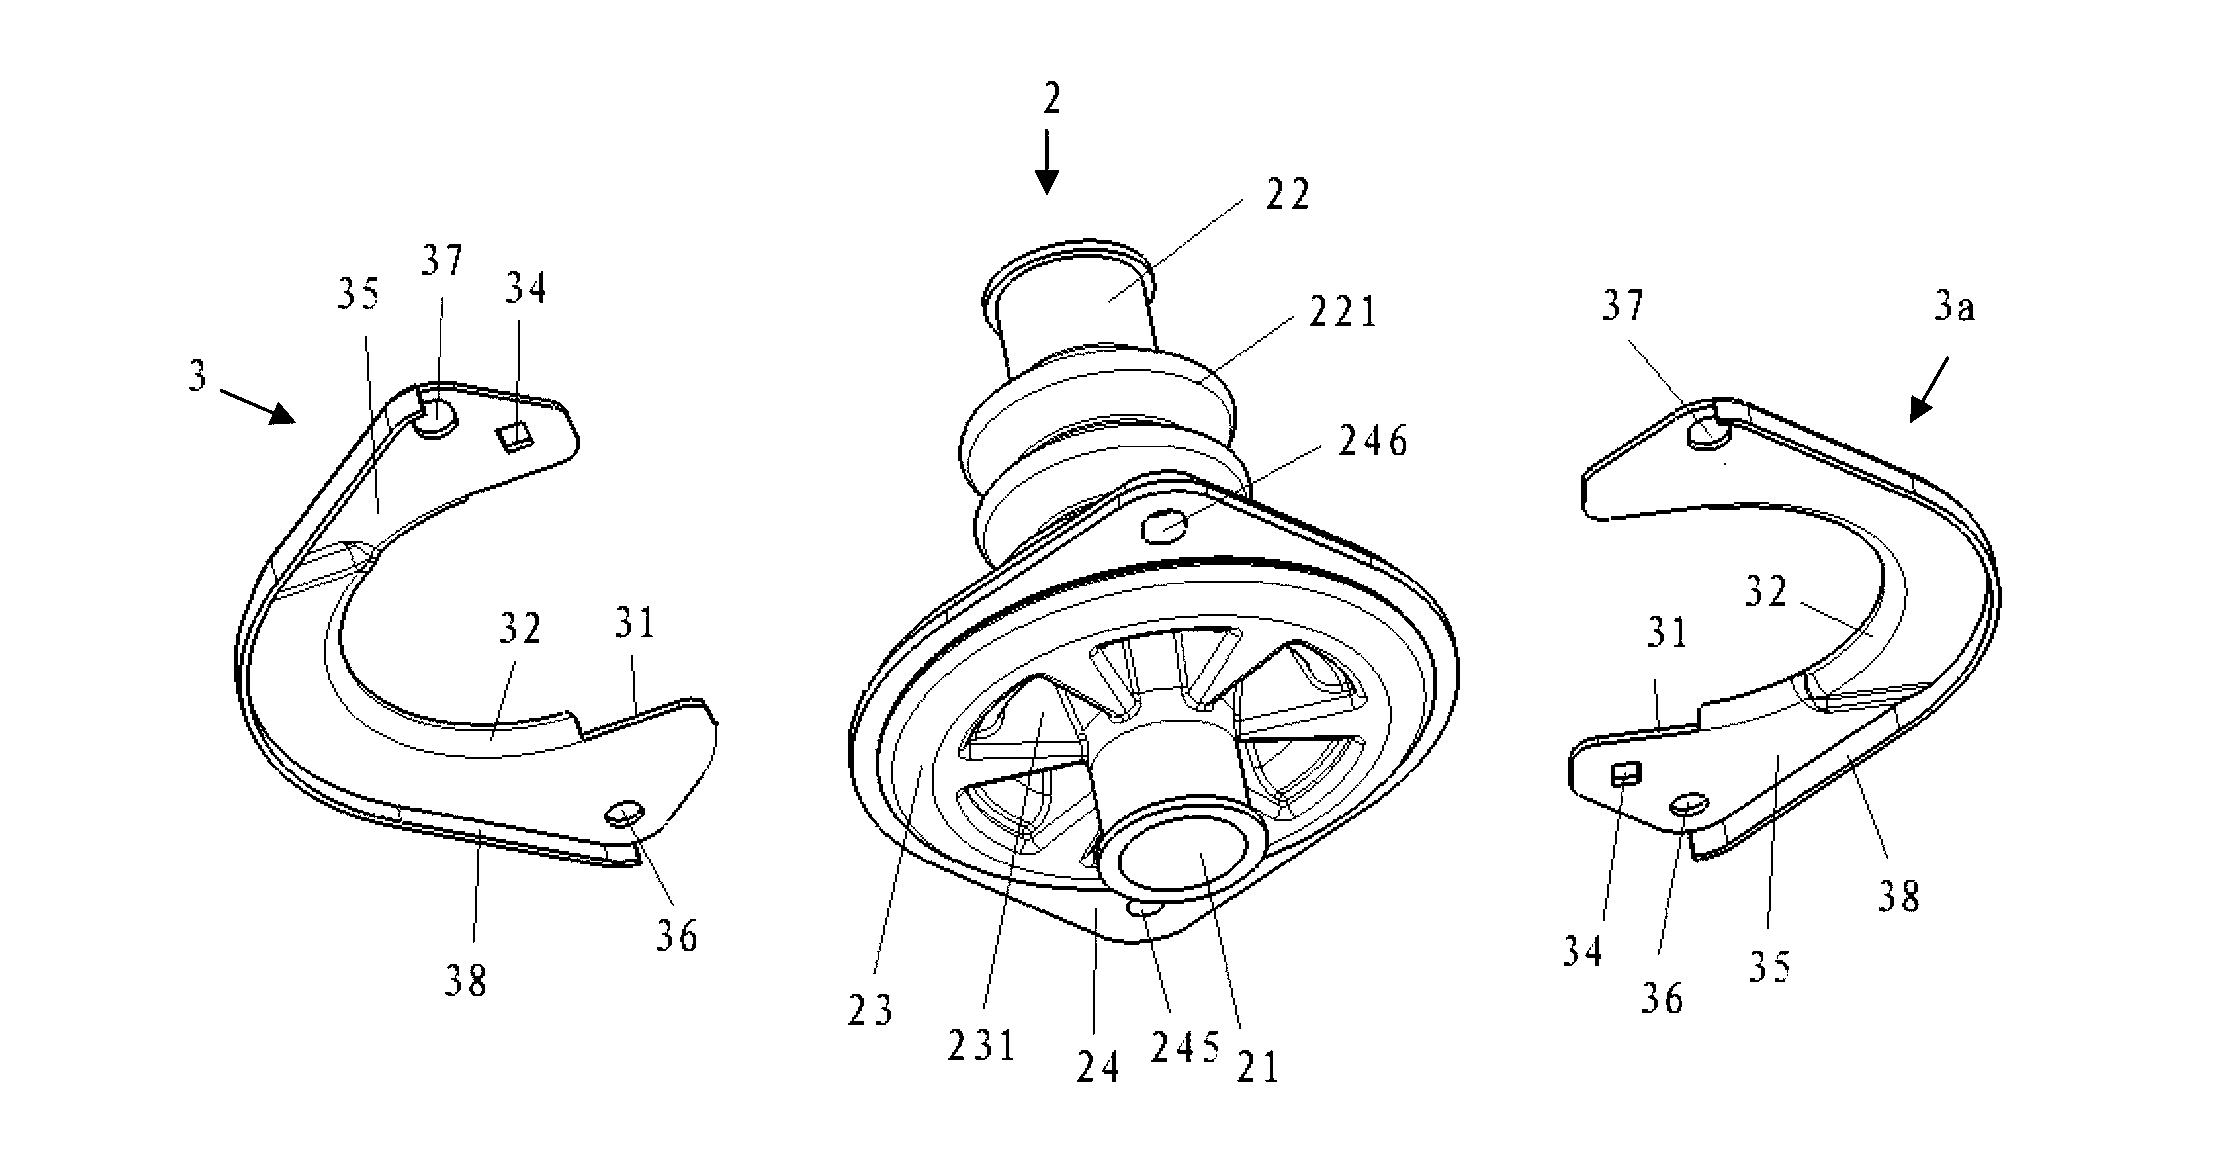 Projective jacket for wire harness of automobile